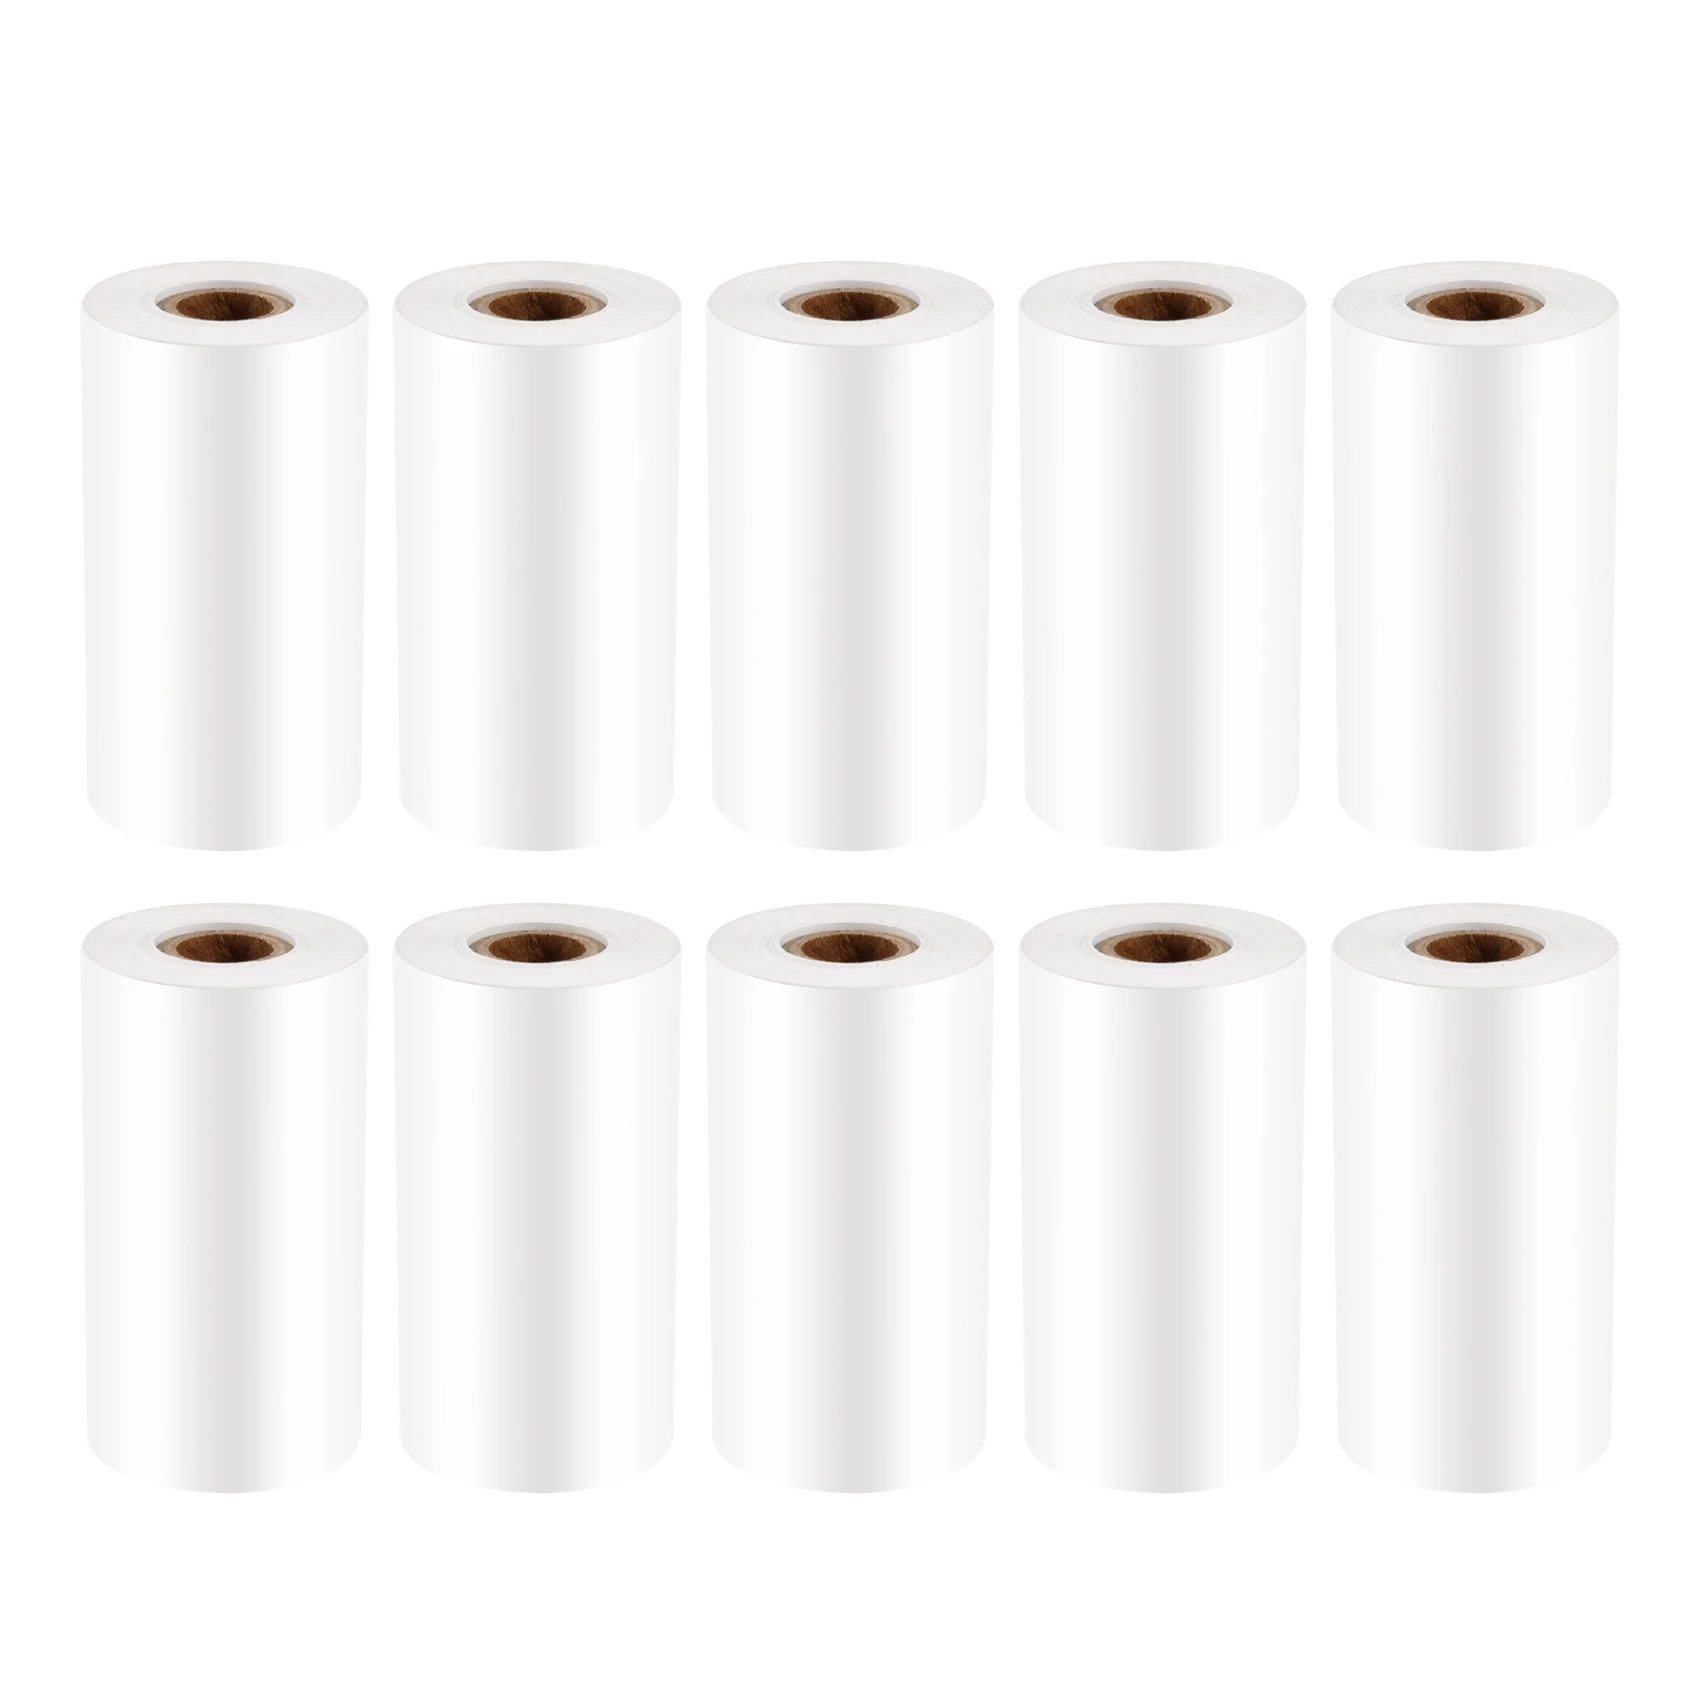 

10 Pcs Thermal Paper, for Mobile 58mm 30mm Mini Thermal Printer Cash Register POS Receipt Paper Roll